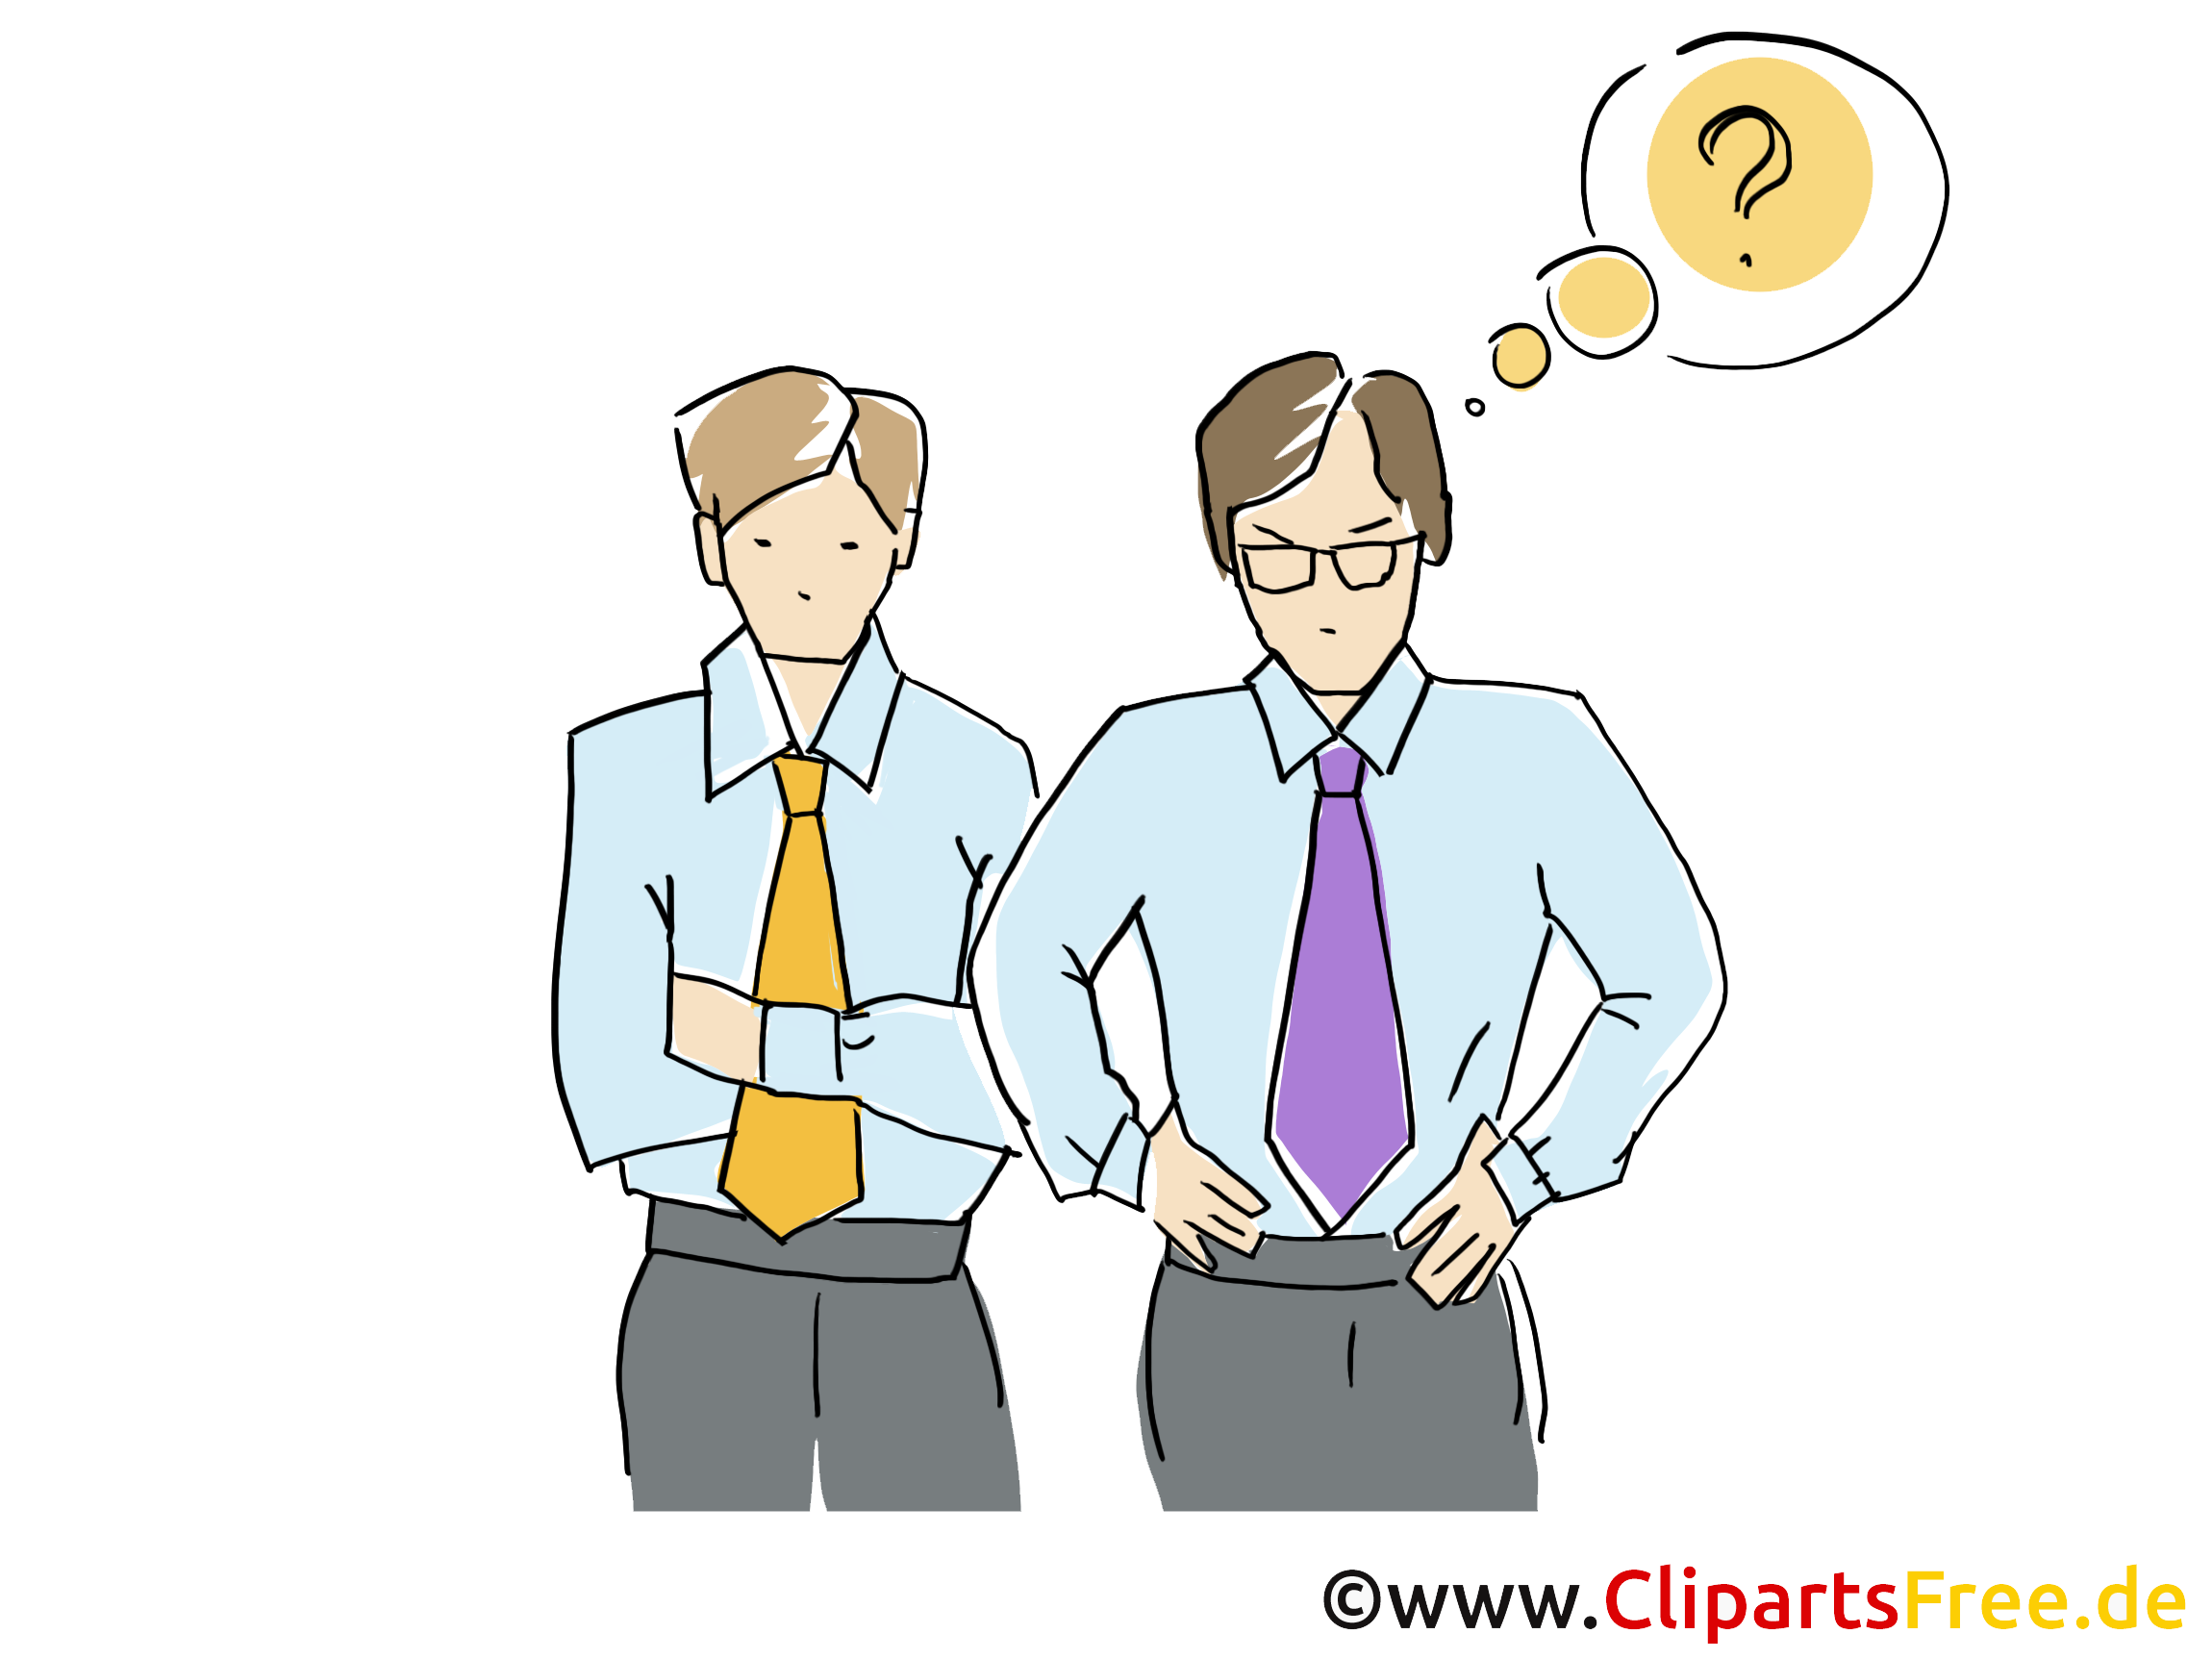 clip art for office download - photo #23